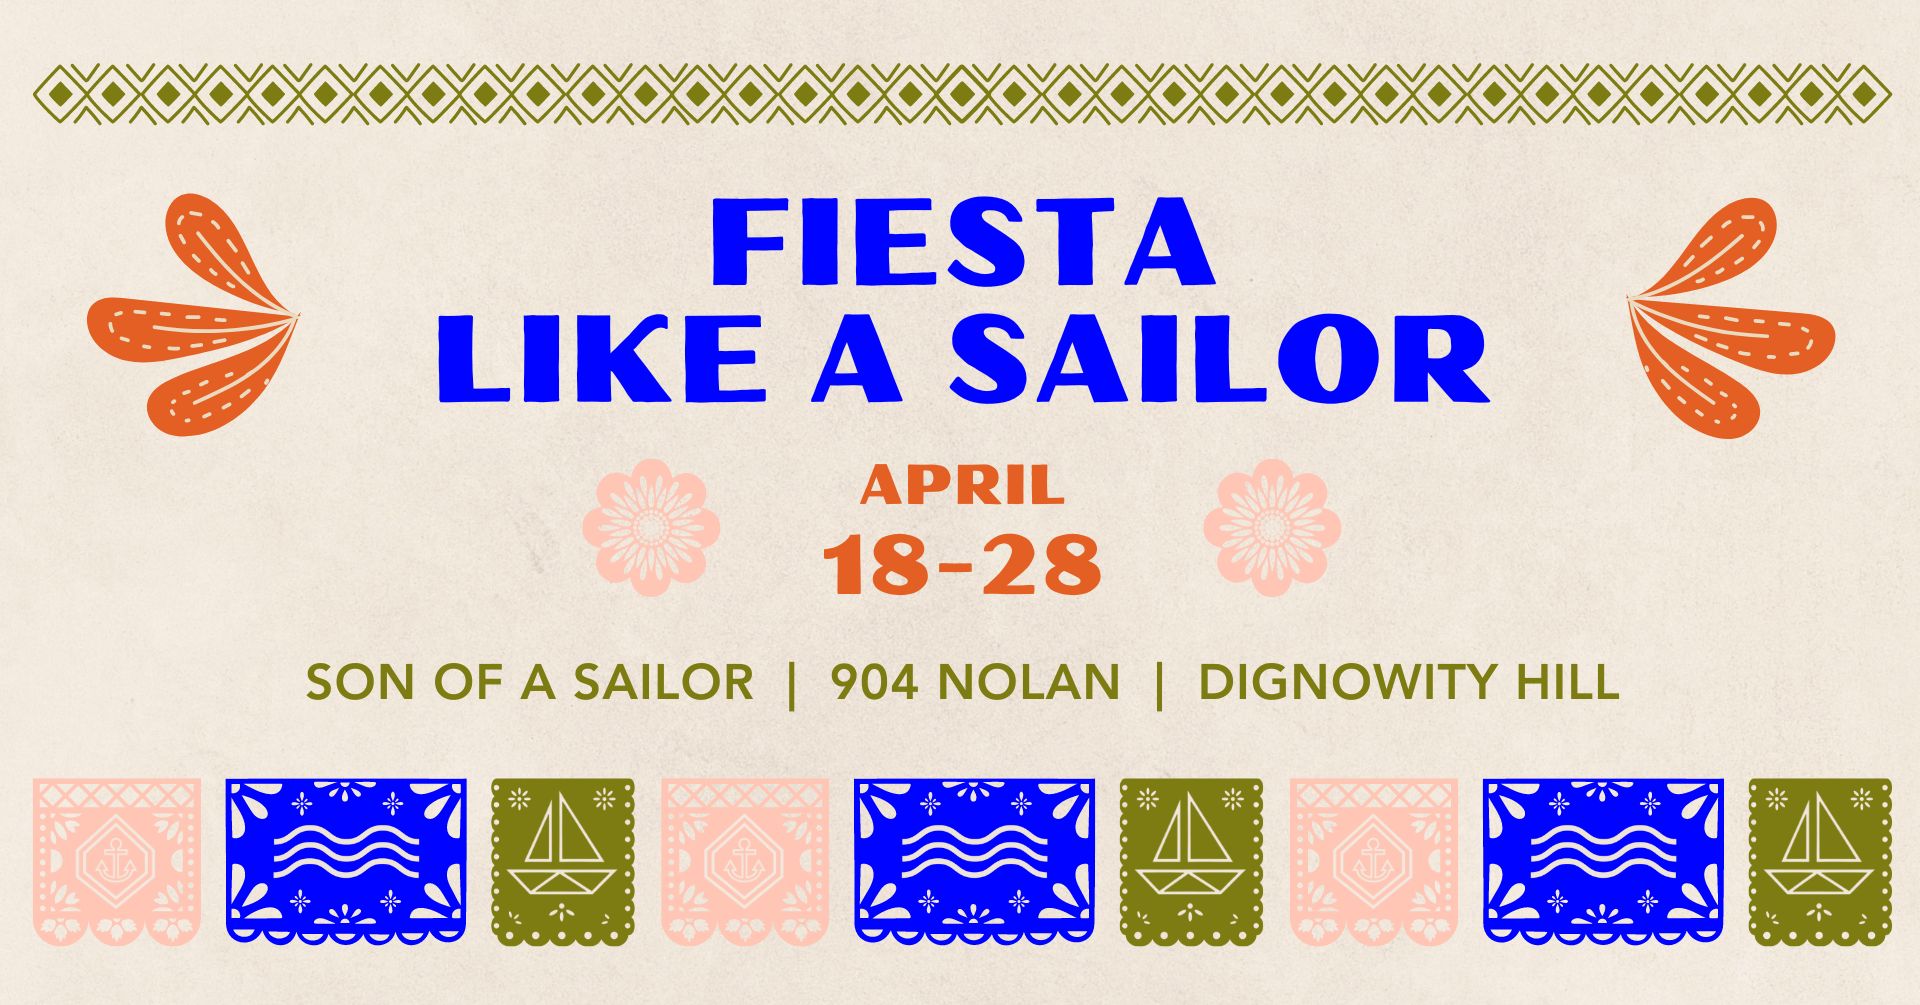 We're ready to Fiesta Like a Sailor!